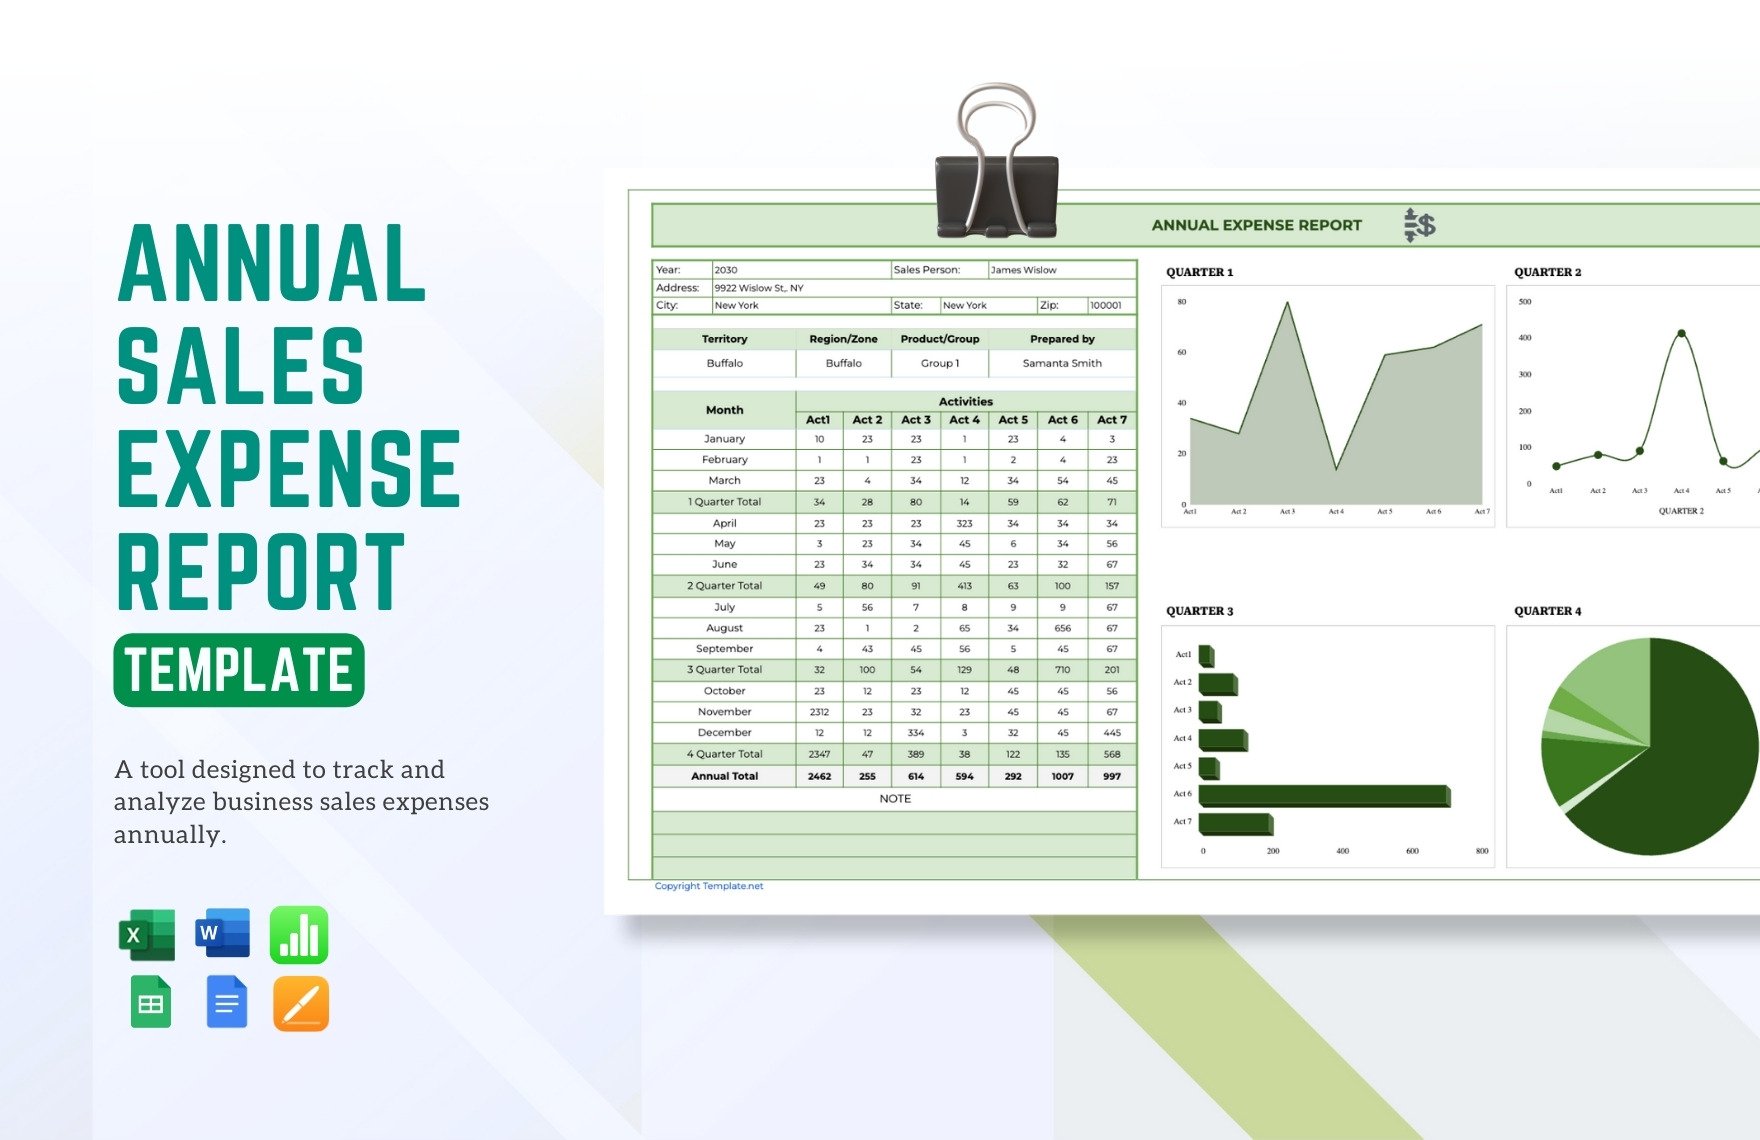 Annual Sales Expense Report Template in Word, Google Docs, Excel, Google Sheets, Apple Pages, Apple Numbers